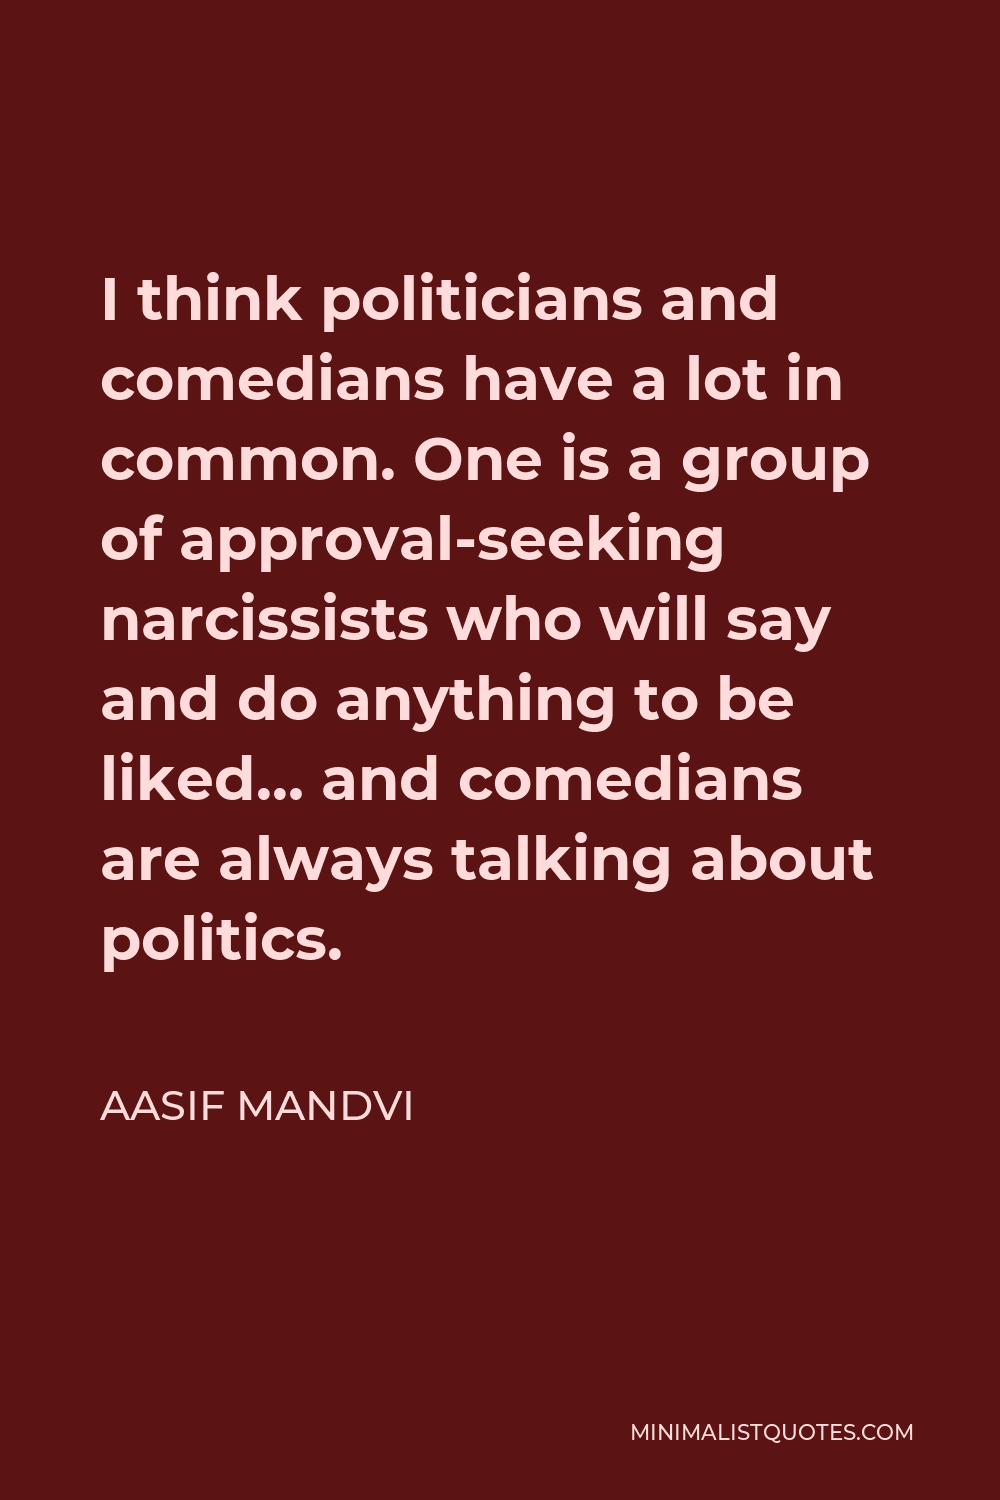 Aasif Mandvi Quote - I think politicians and comedians have a lot in common. One is a group of approval-seeking narcissists who will say and do anything to be liked… and comedians are always talking about politics.